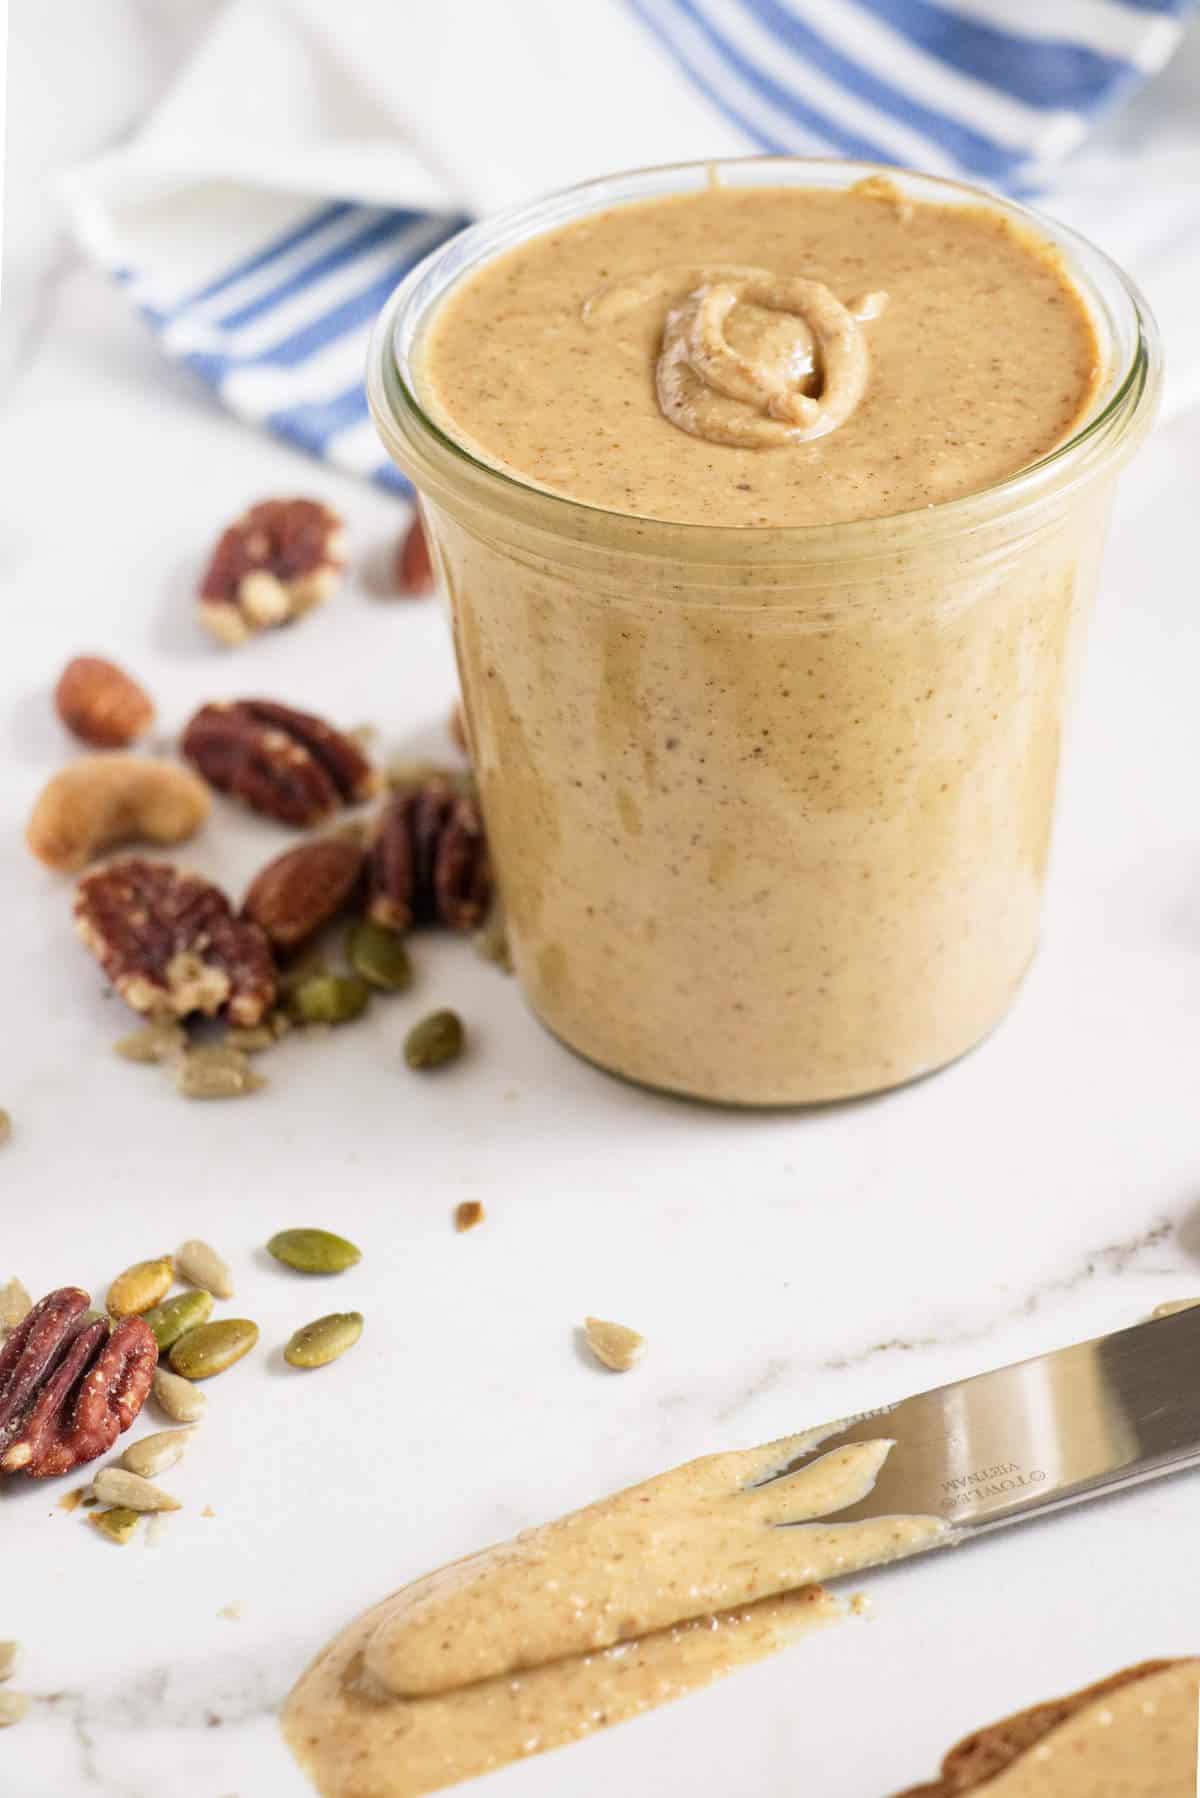 Roasted seed and nut butter